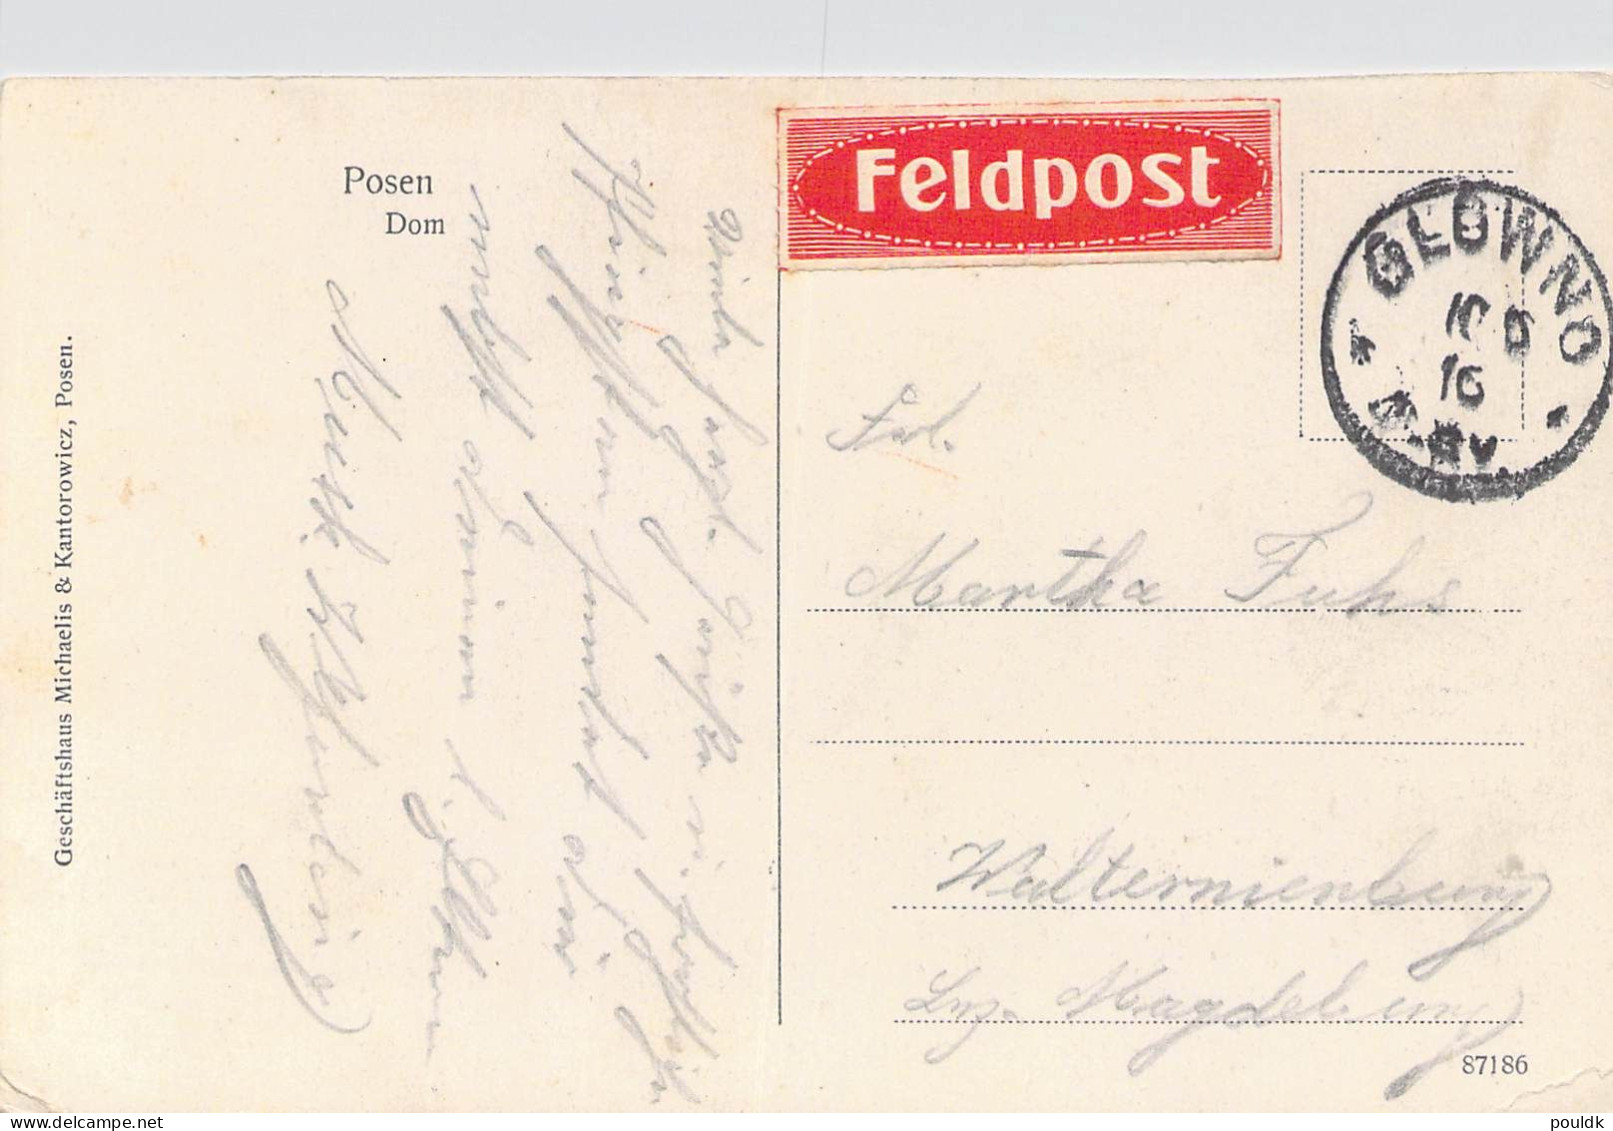 German Feldpost WW1: Postcard Arch Cathedral Basilica Of St. Peter And St. Paul In Posen, Now Poznan (Poland) Posted Fro - Militares